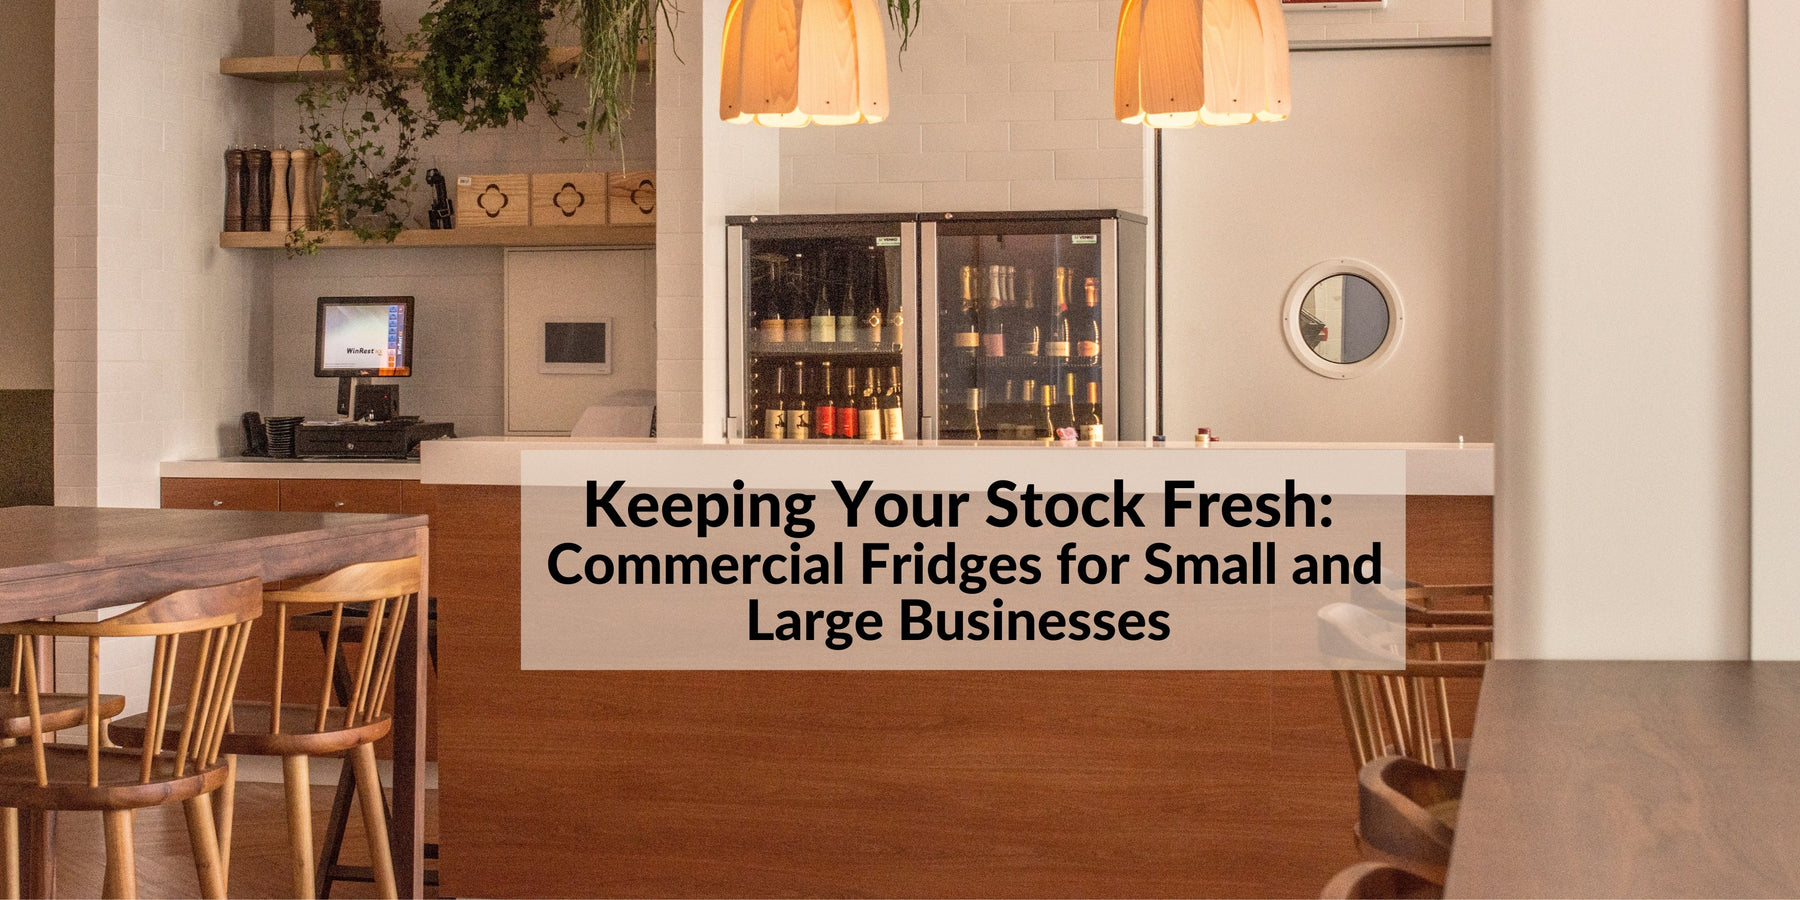 Keeping Your Stock Fresh: Commercial Fridges for Small and Large Businesses - Lushmist